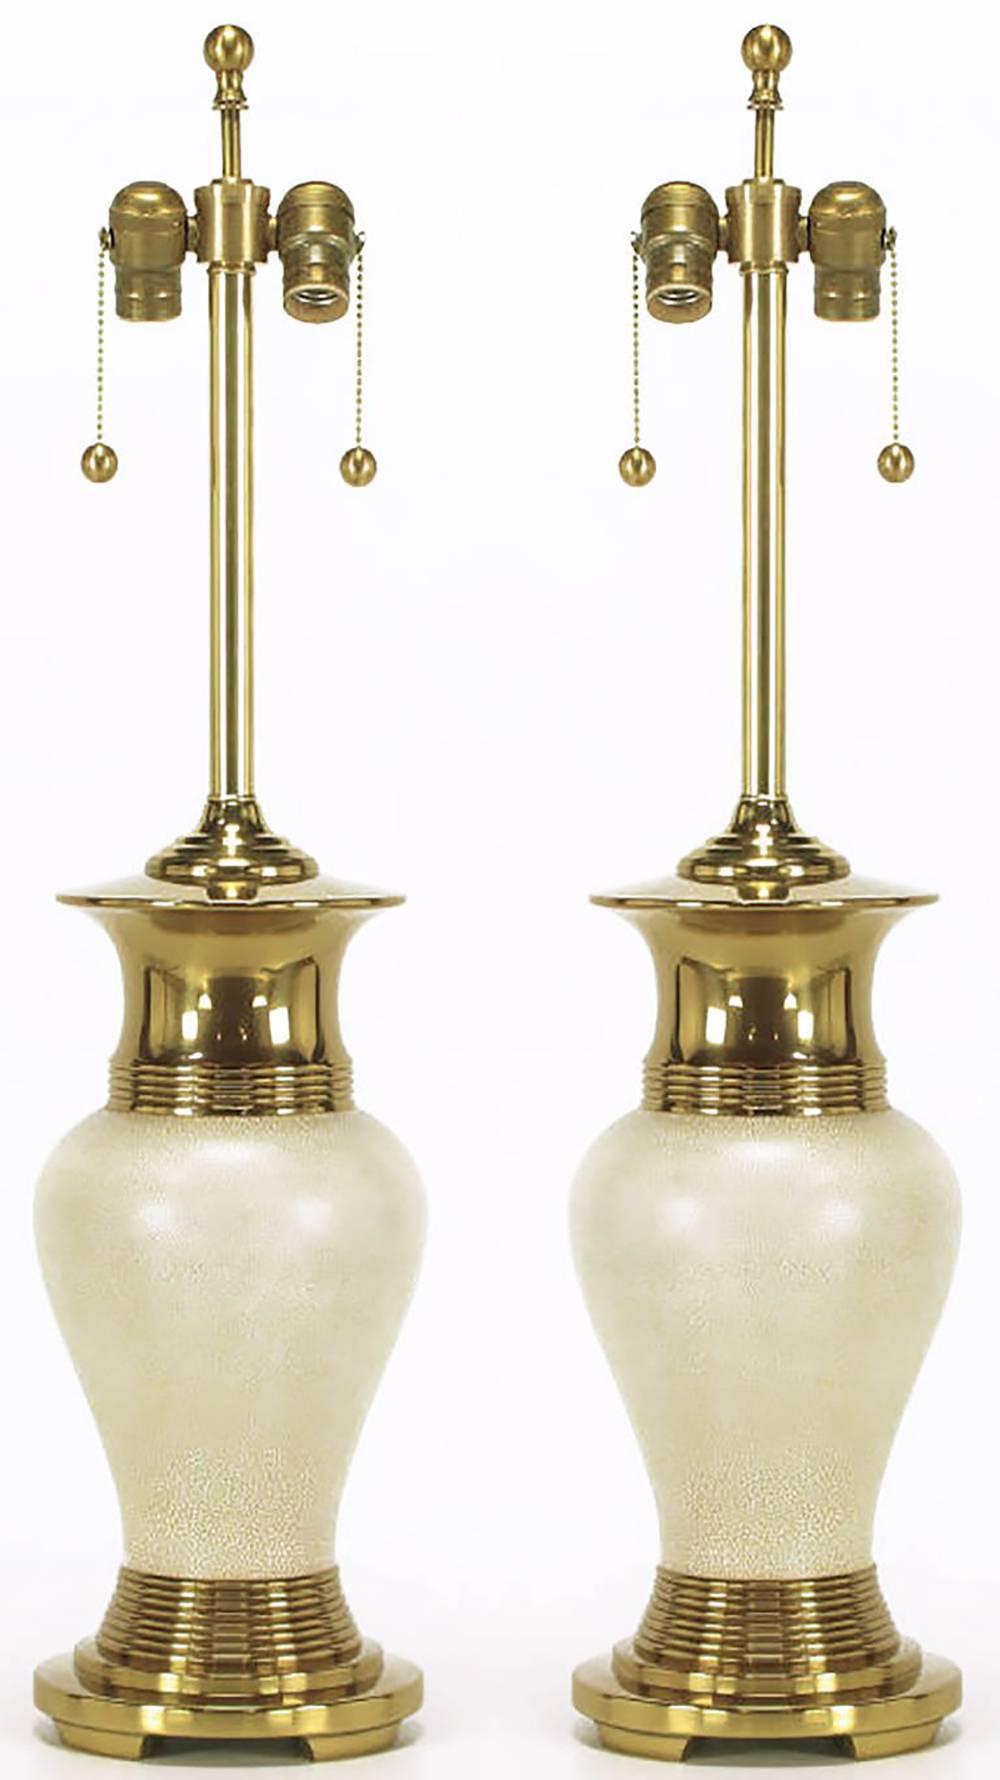 Pair of modern table lamps with heavy brass open footed basses and flanged vase form tops. The vase form body is ivory crackle glaze over brass. Brass stem and dual socket cluster with brass ball pull chains. Sold sans shades.